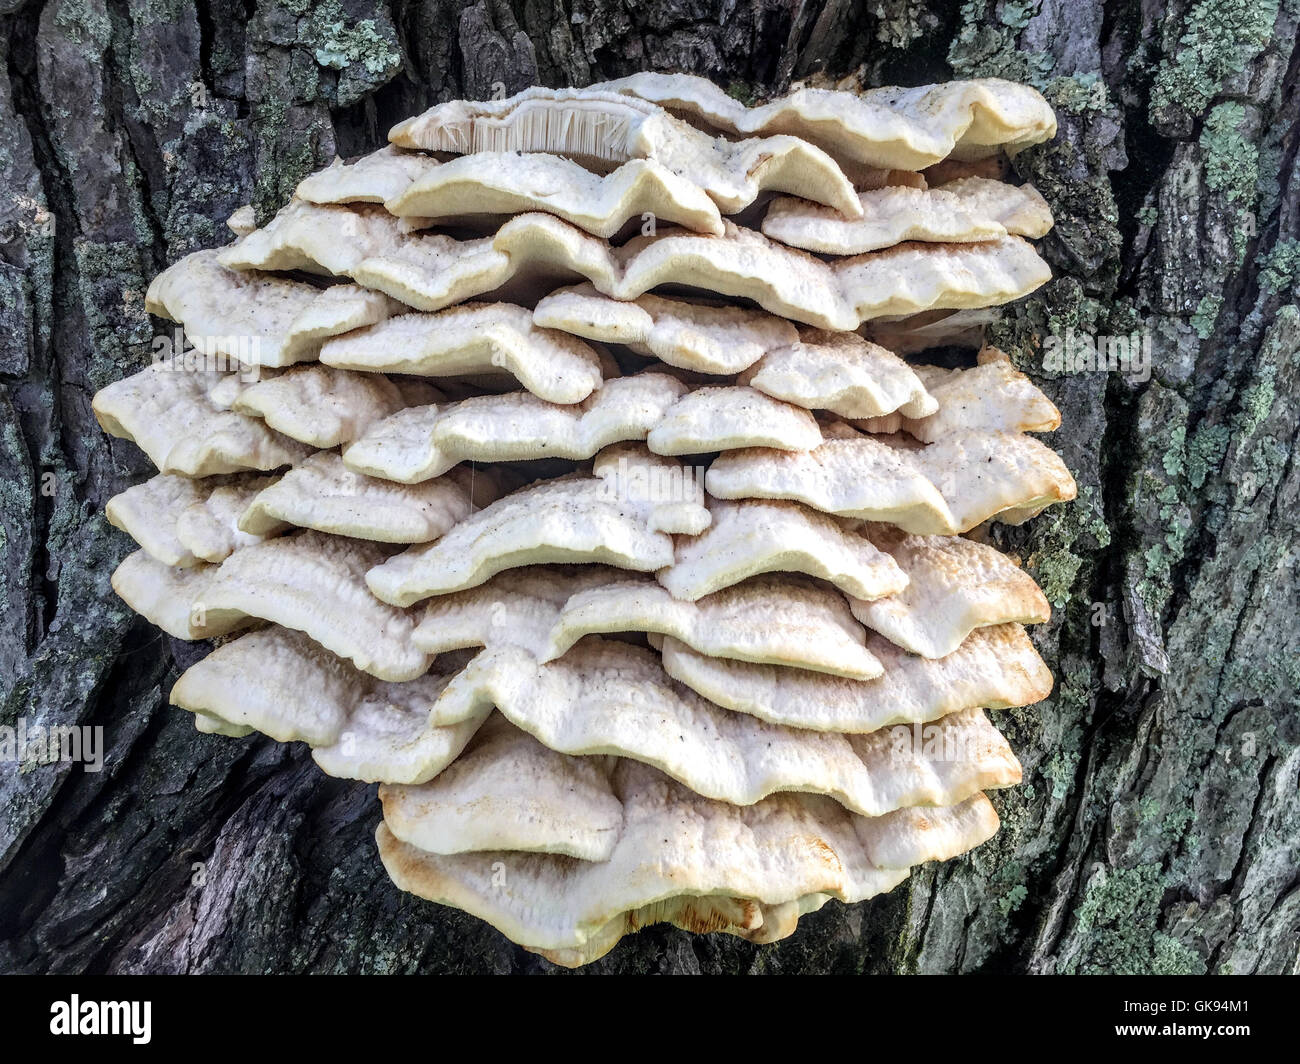 Wild mushroom stack growing on a Maple tree in Wisconsin Stock Photo